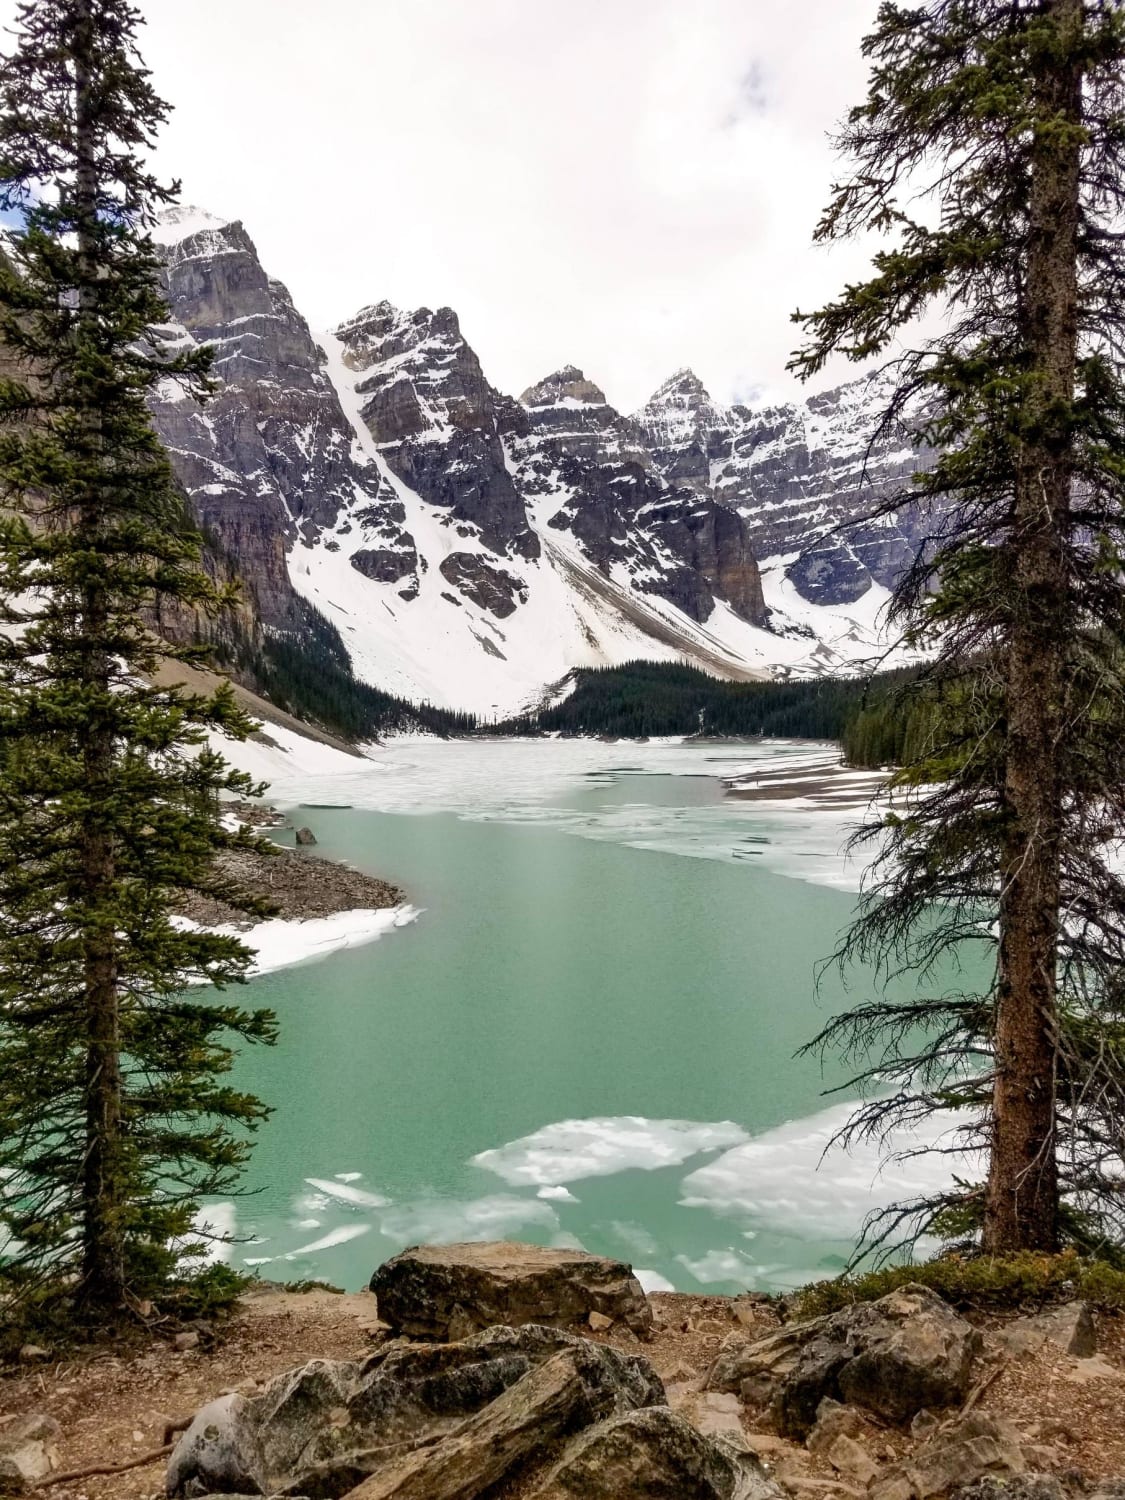 Covid restrictions allowed us the rare opportunity to enjoy Reddit's favourite lake crowd free yesterday. Moraine Lake, Alberta.